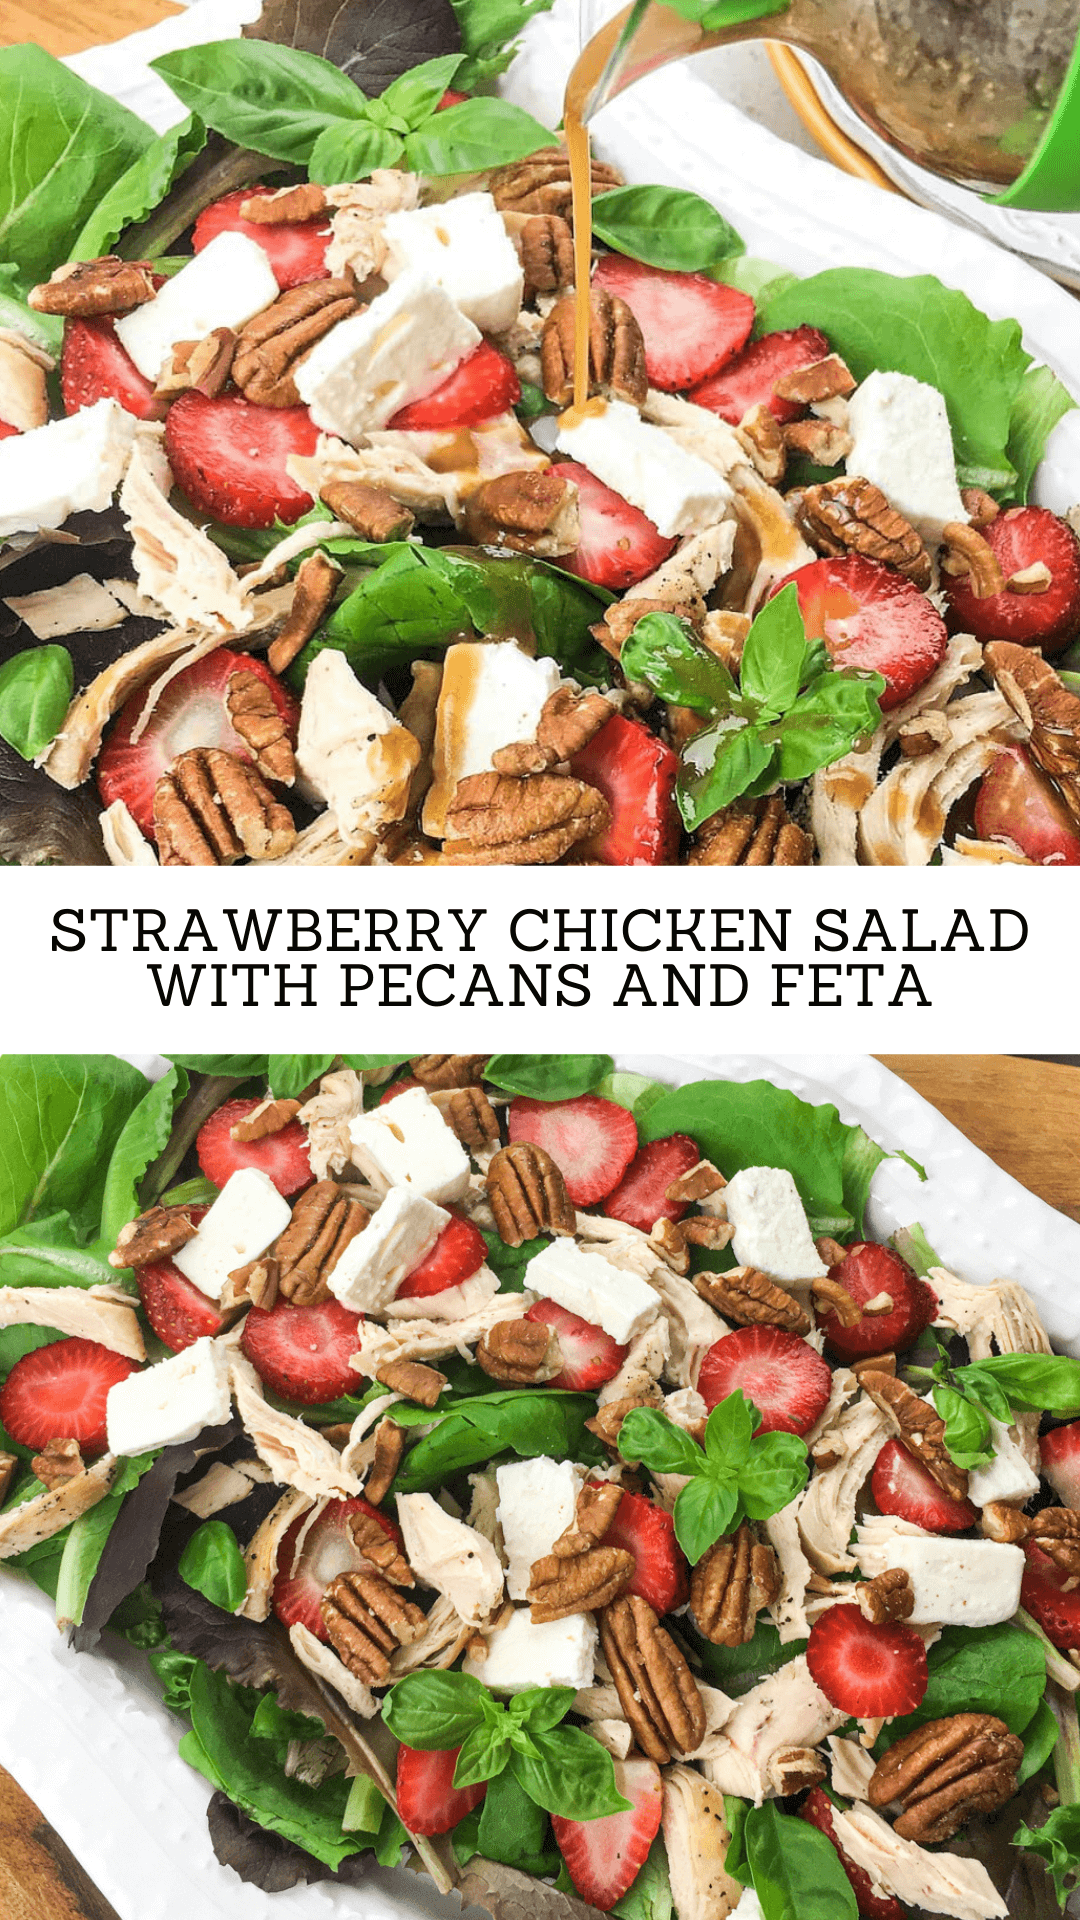 Strawberry Chicken Salad with Pecans and Feta - PIN